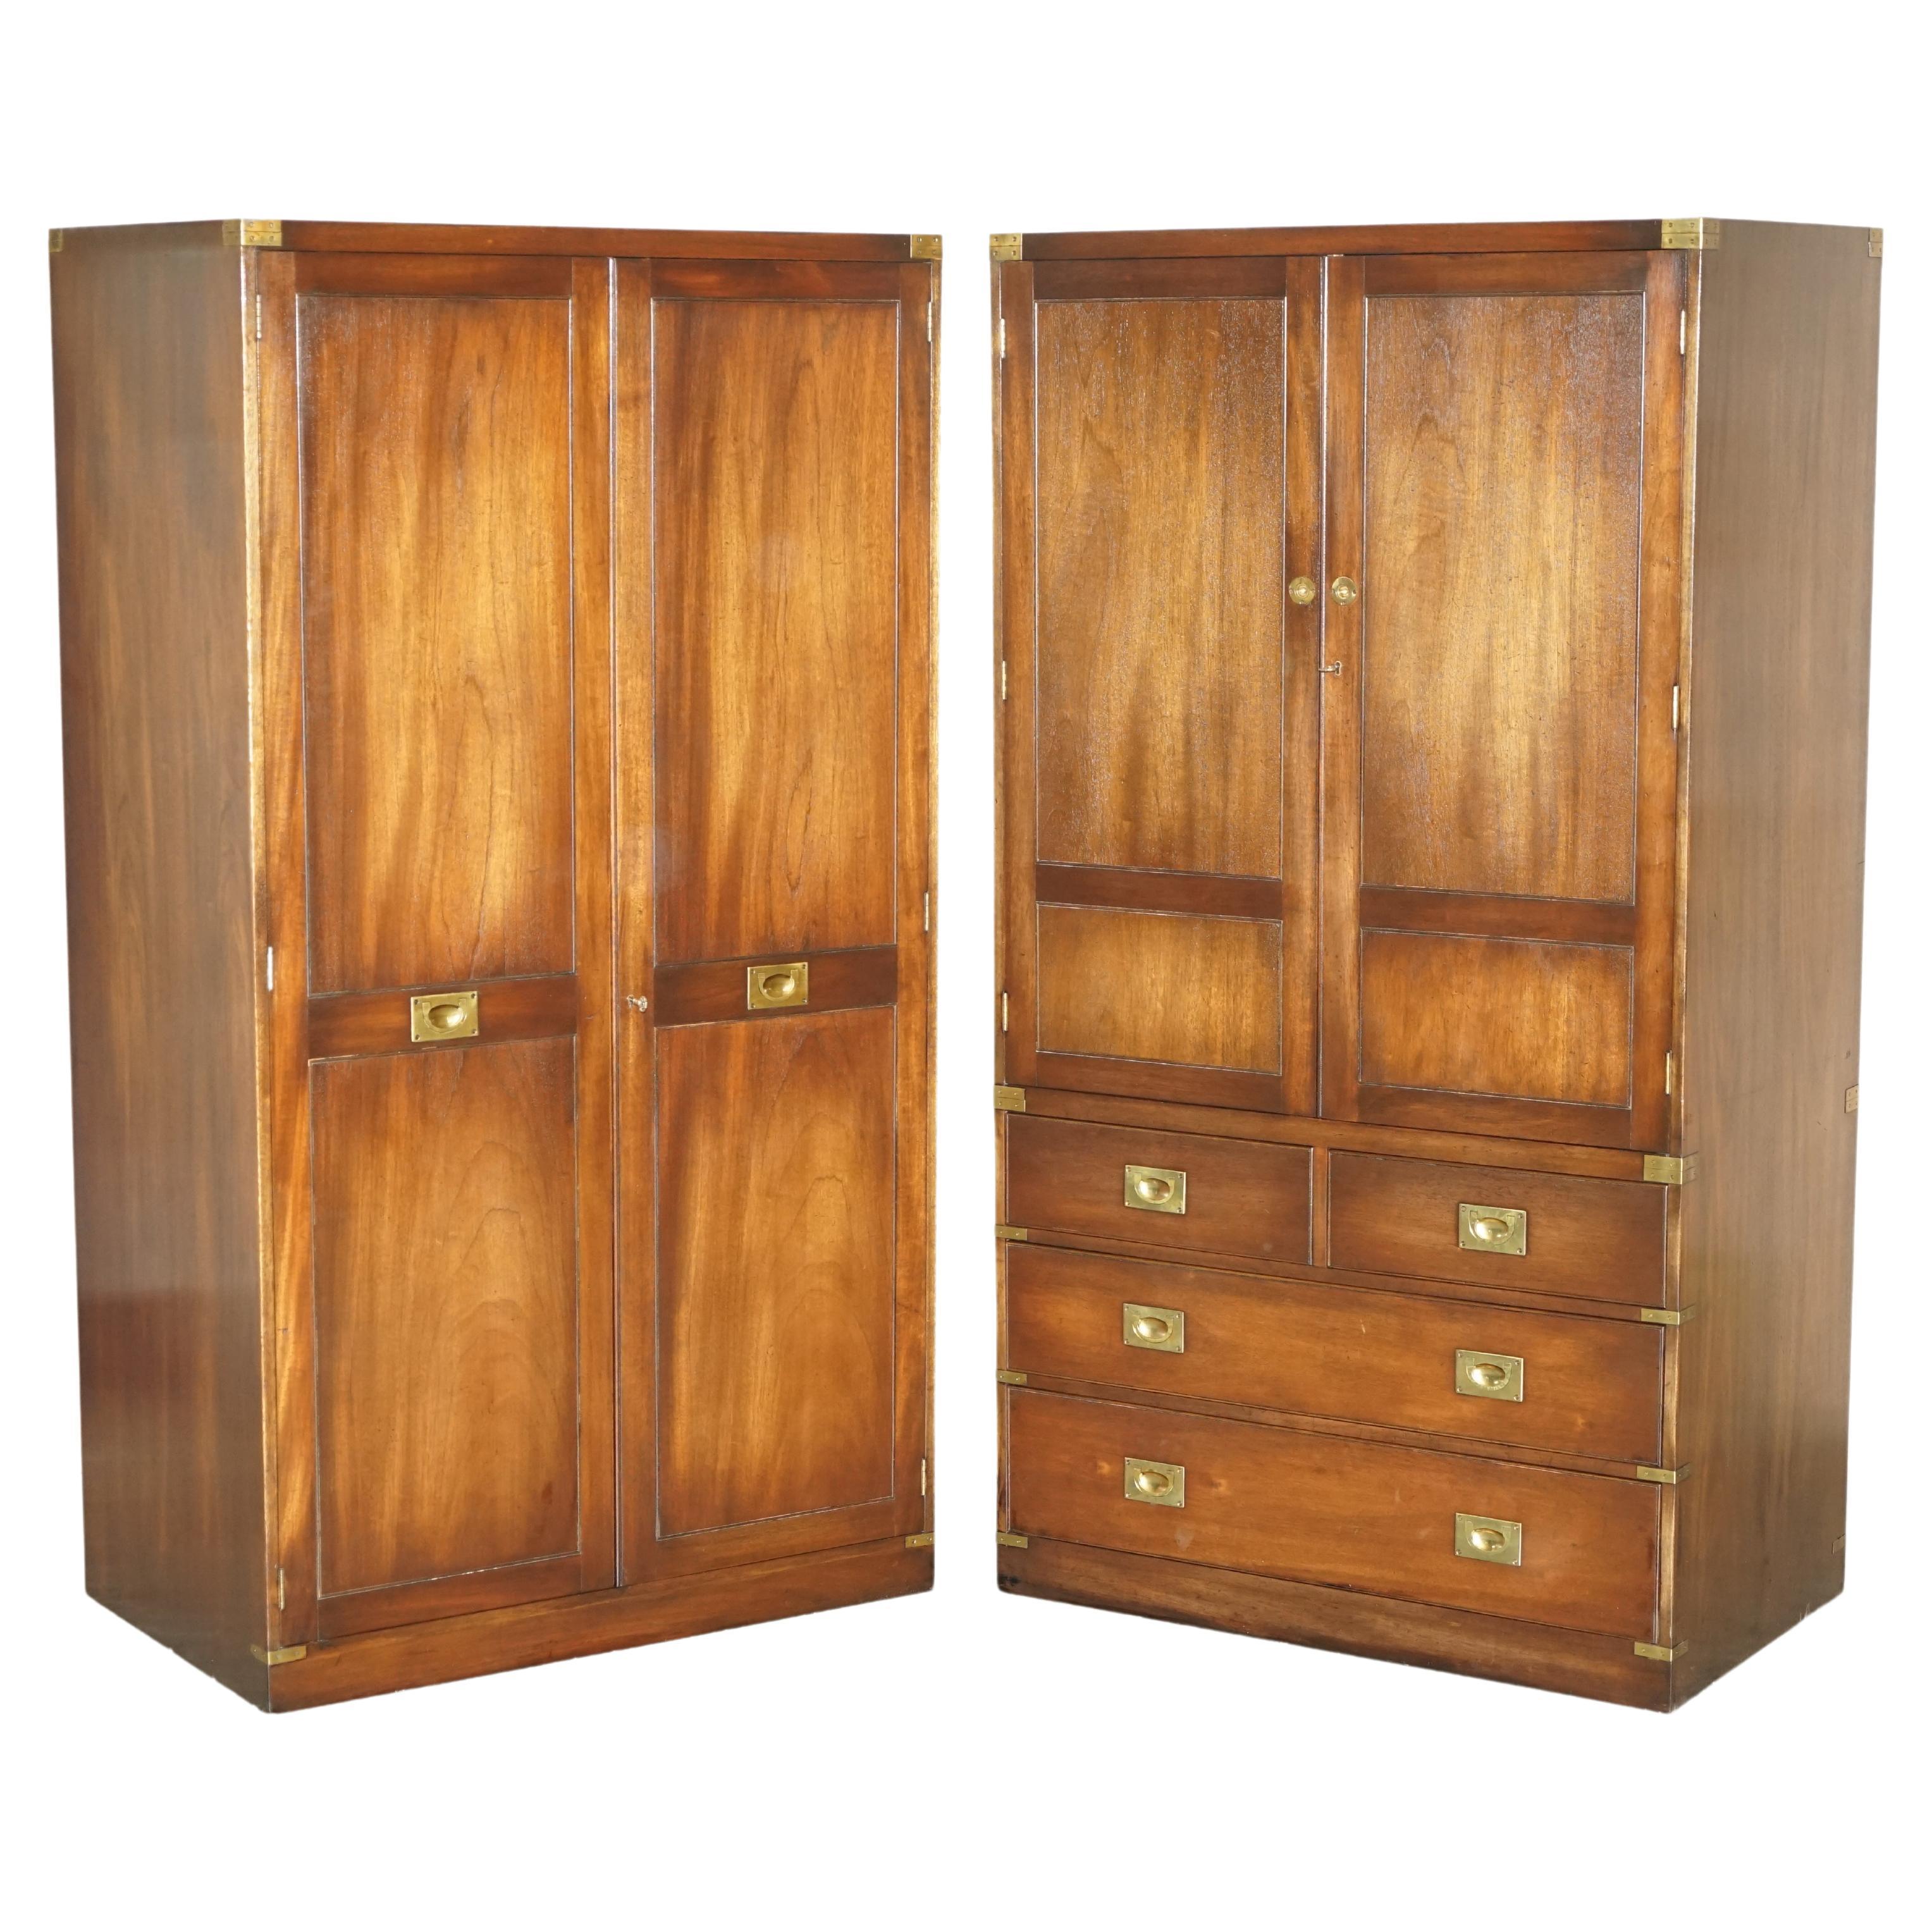 Pair of Vintage Solid Hardwood & Brass Military Campaign Wardrobes with Drawers